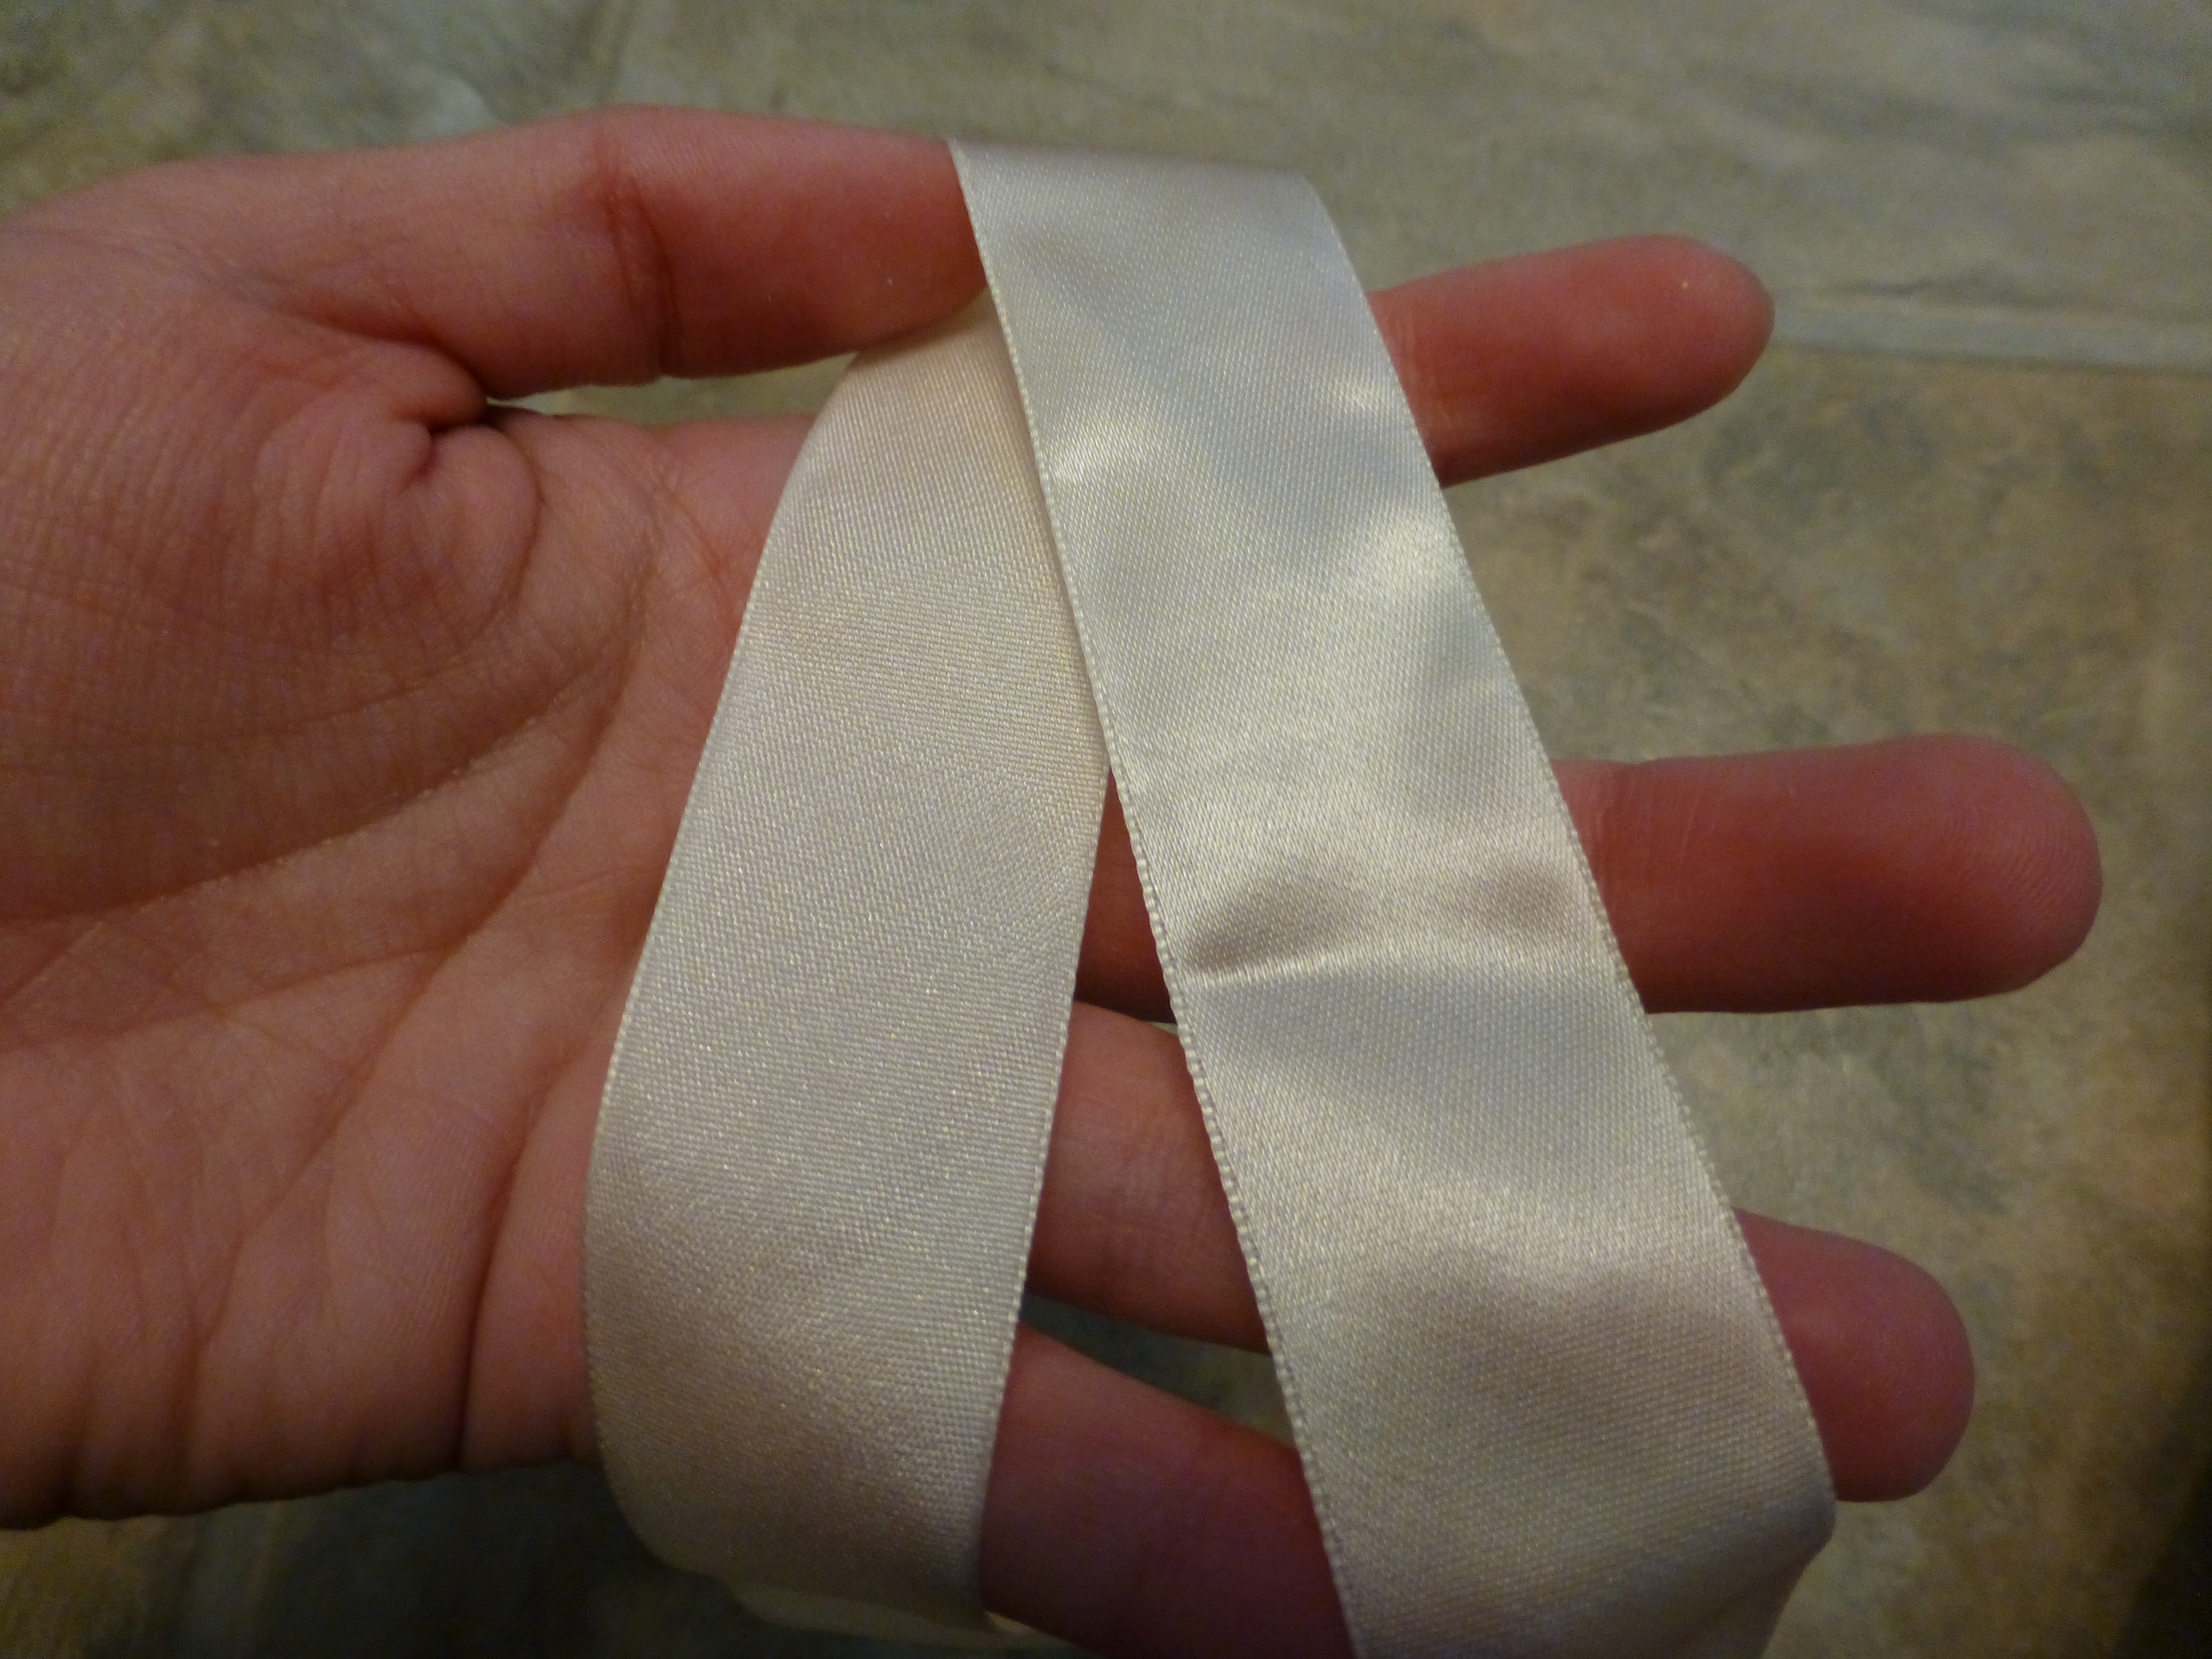 Pointe shoe ribbon - shiny side and dull side